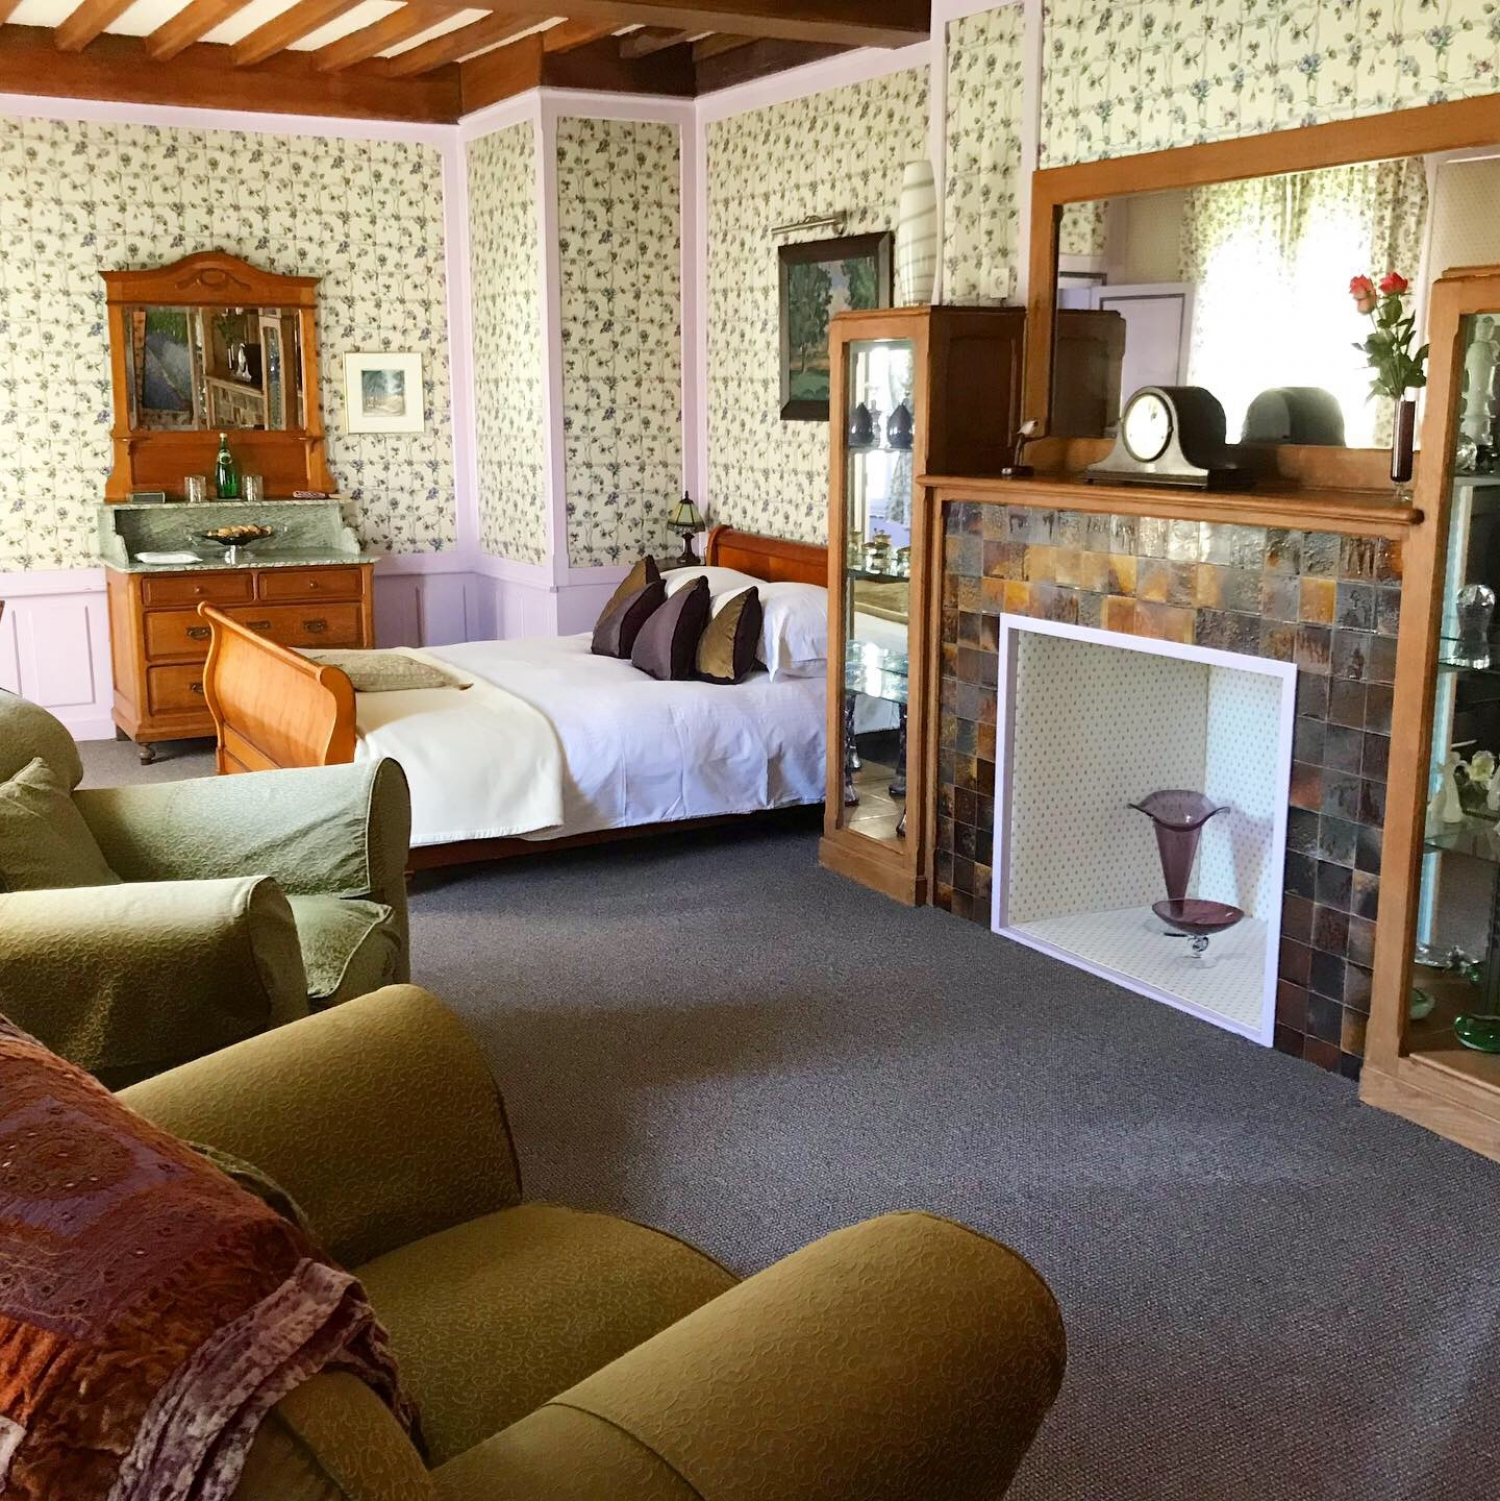 The Junior garden suite has a sleigh bed, large art deco wardrobe, dresser, desk and two large over-stuffed arm chairs